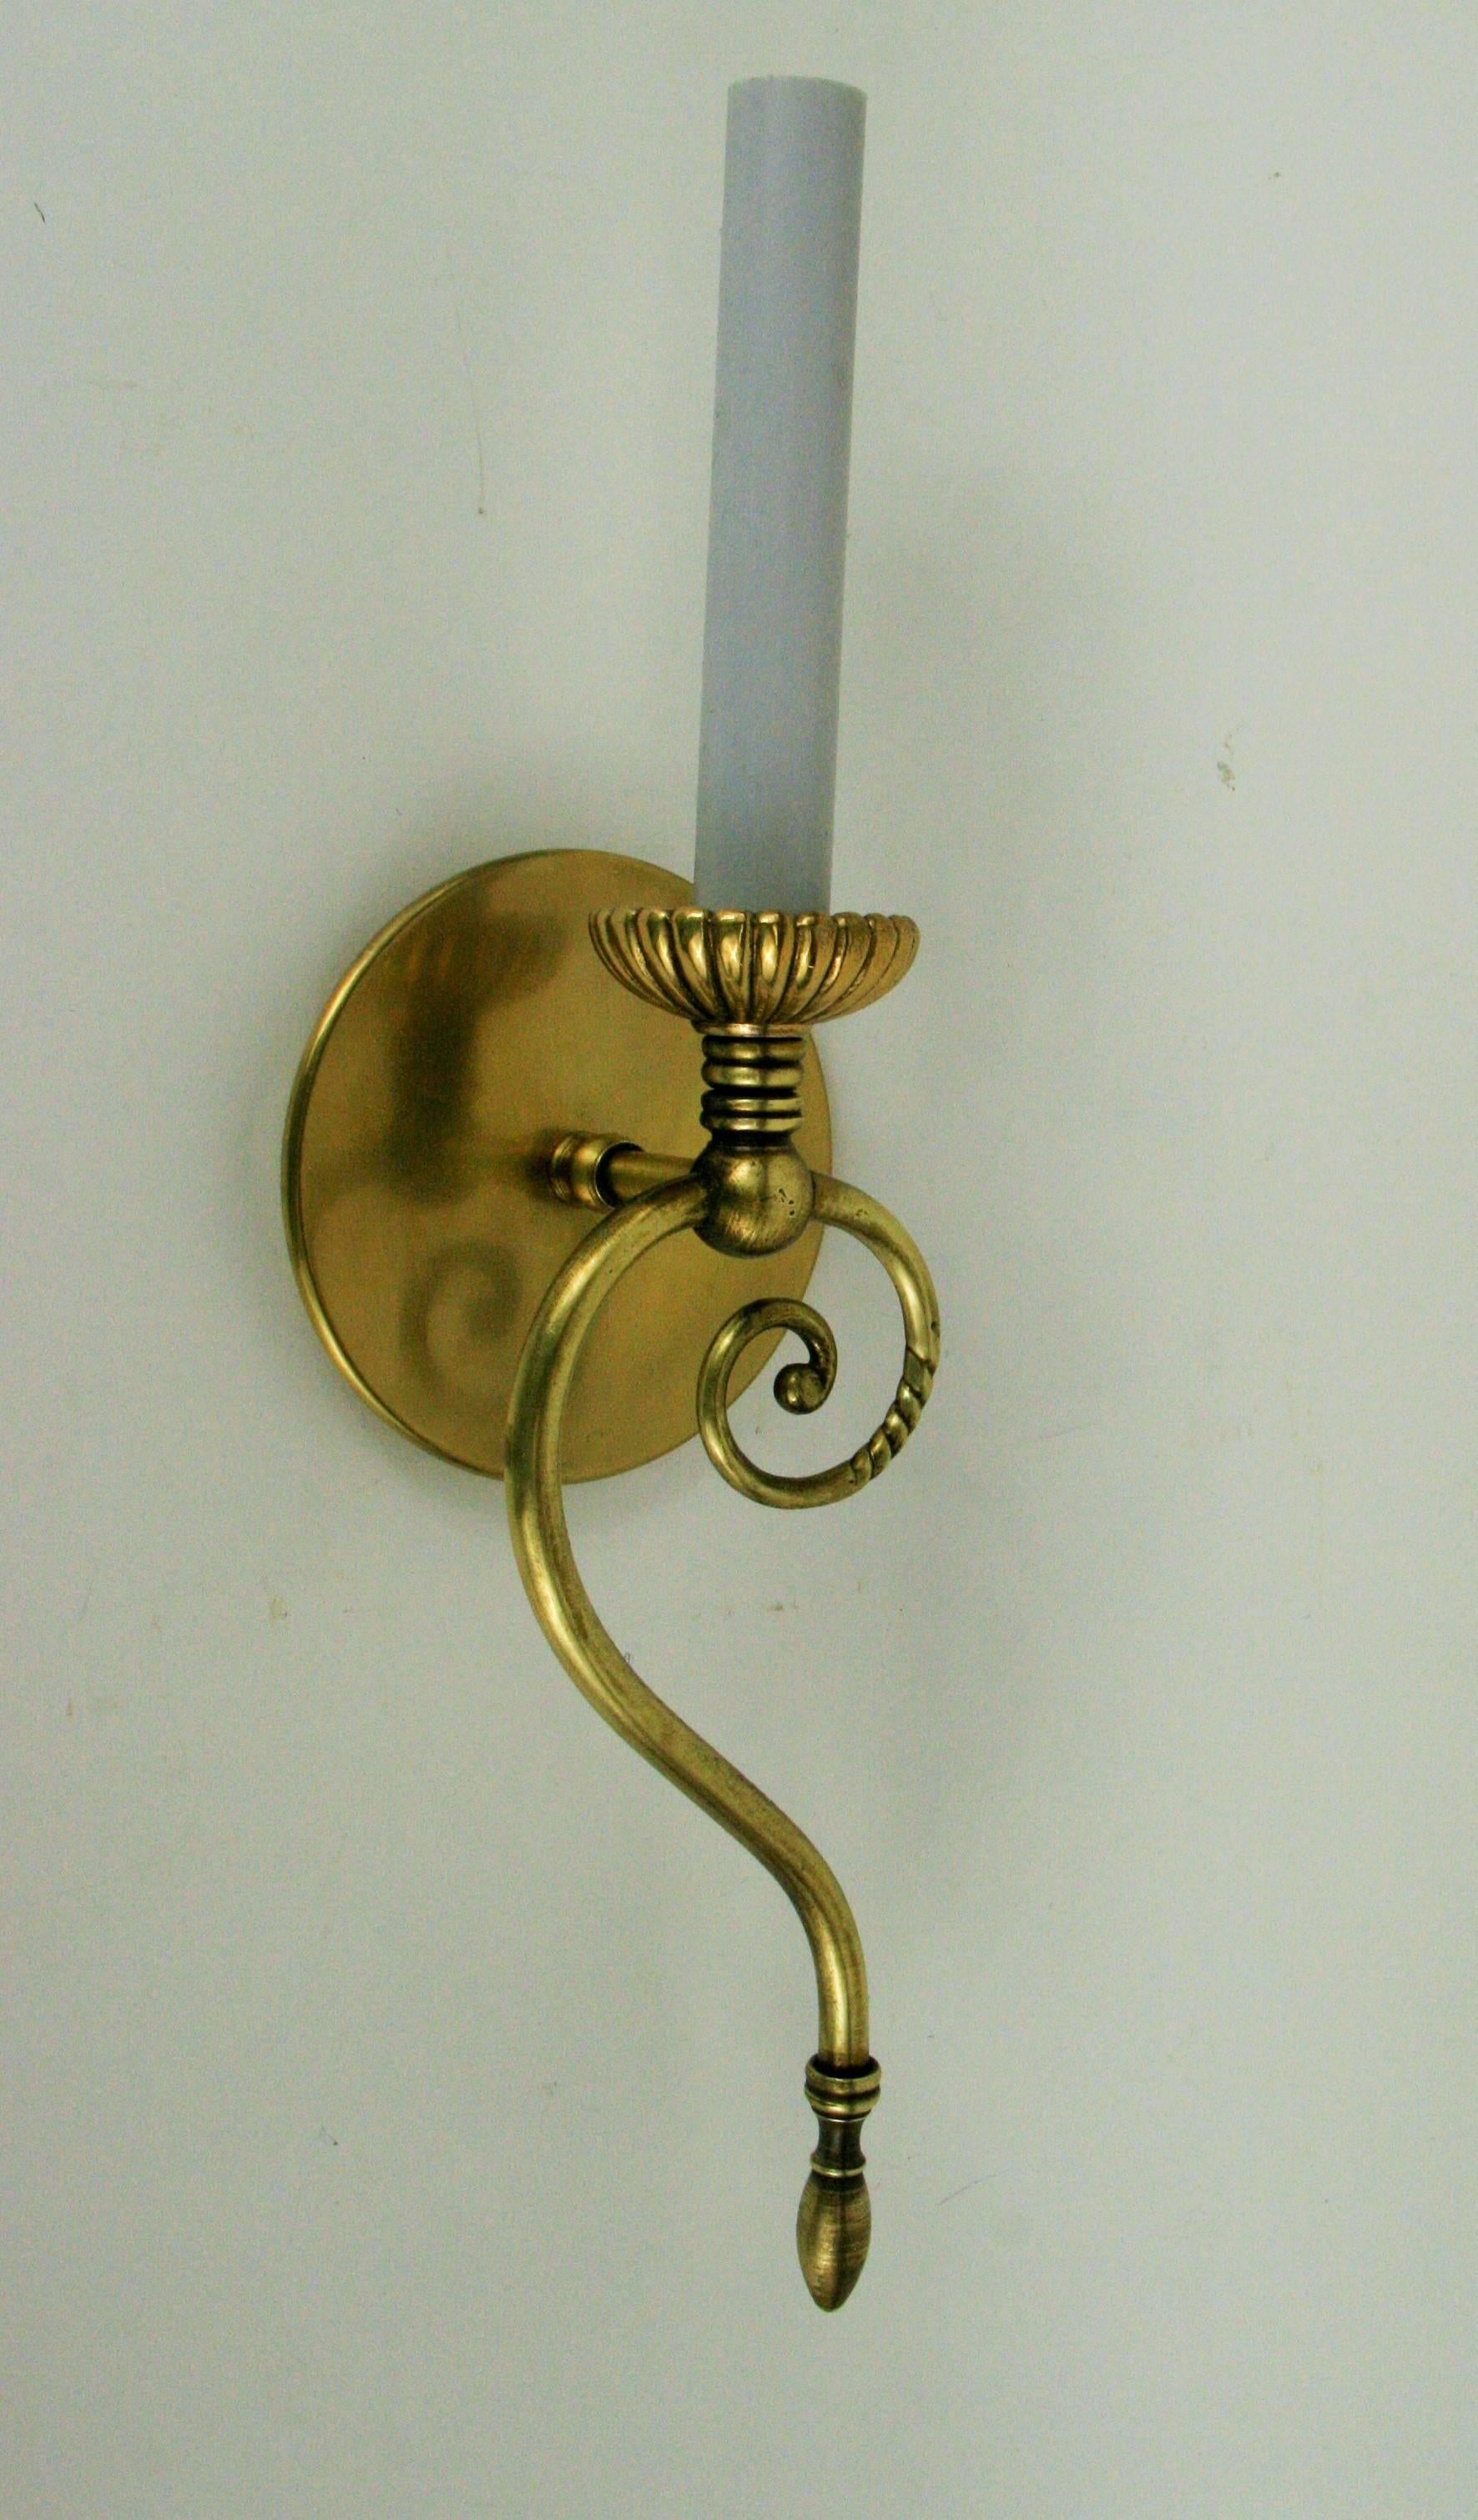 1-4077 a pair of swirled brass single light sconce.
Newly rewired.